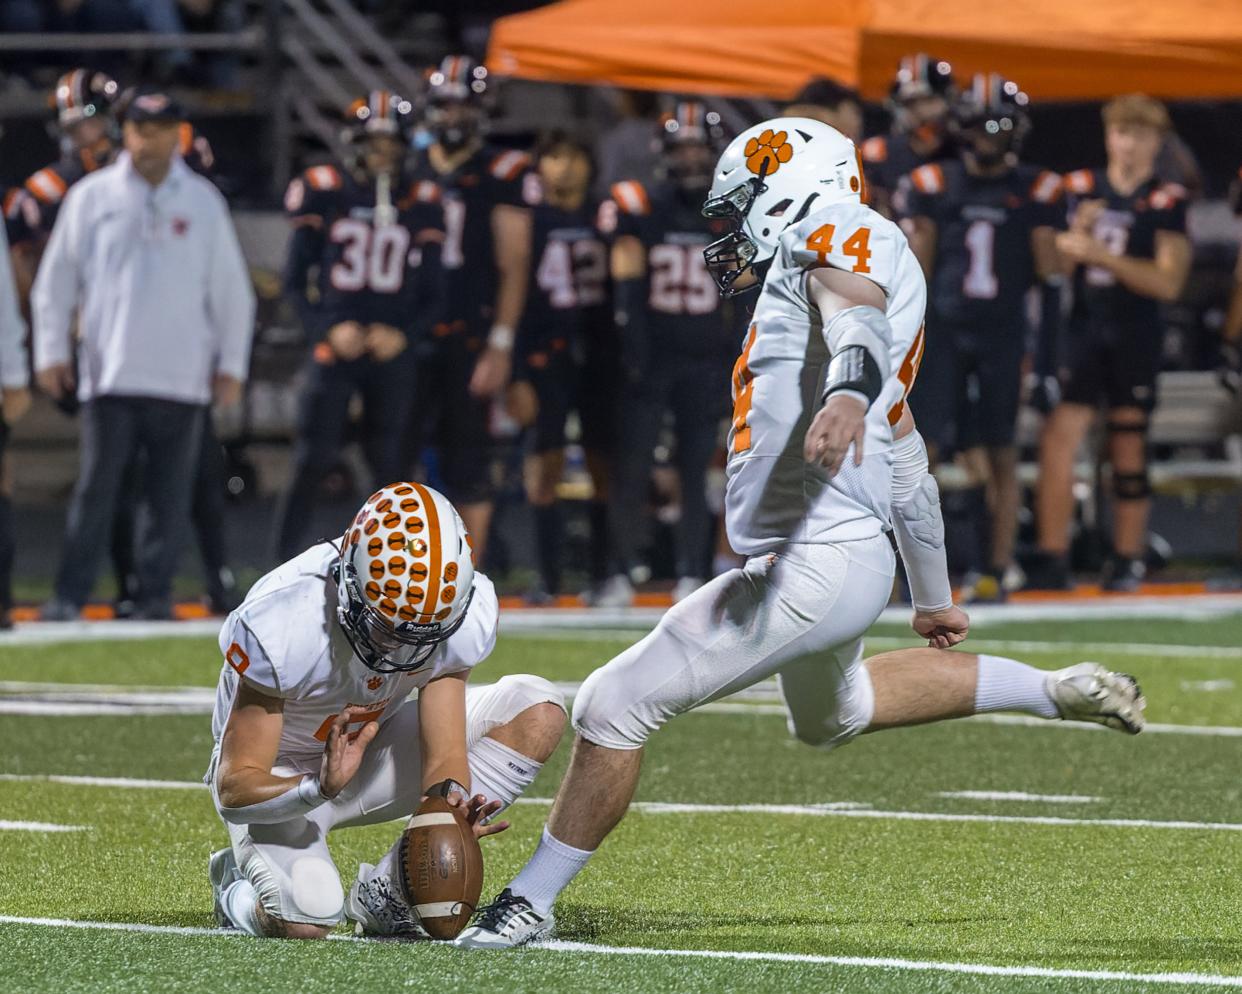 Brighton kicker Braeden Chiles has made The Associated Press' Division 1-2 all-state first team.